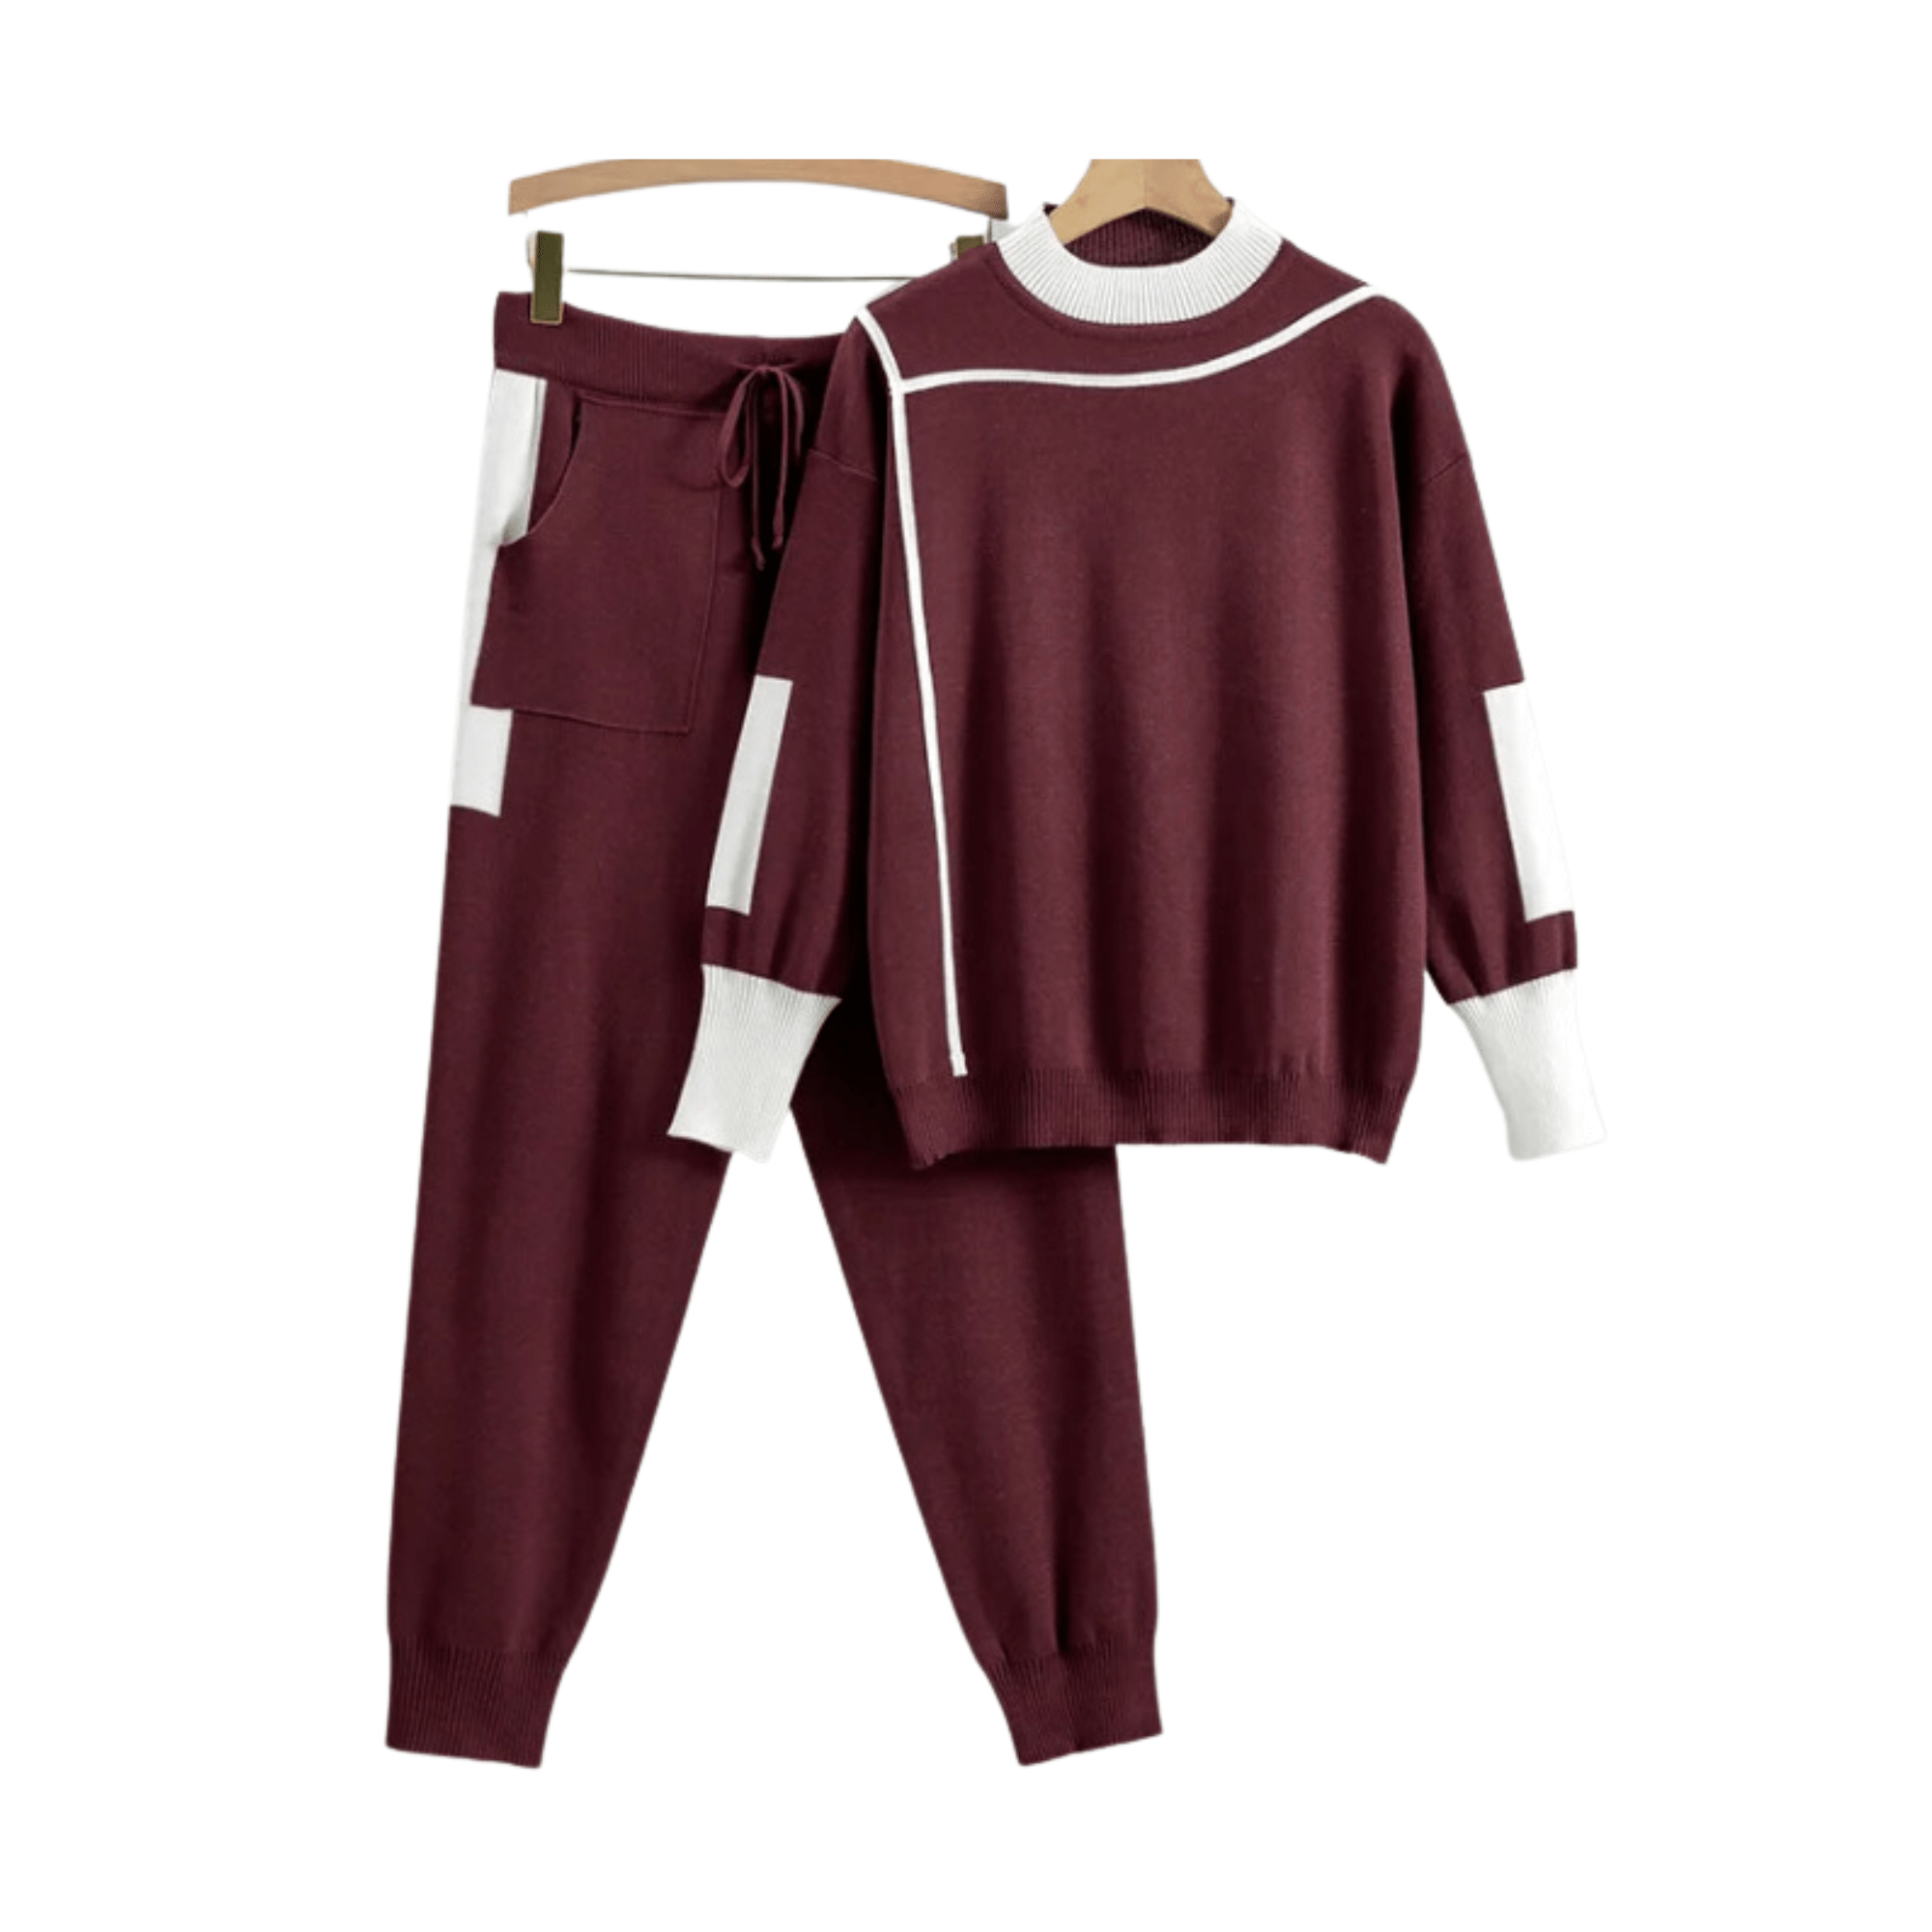 Patch Pockets Knitted Sweater + Pants Set - Kelly Obi New York